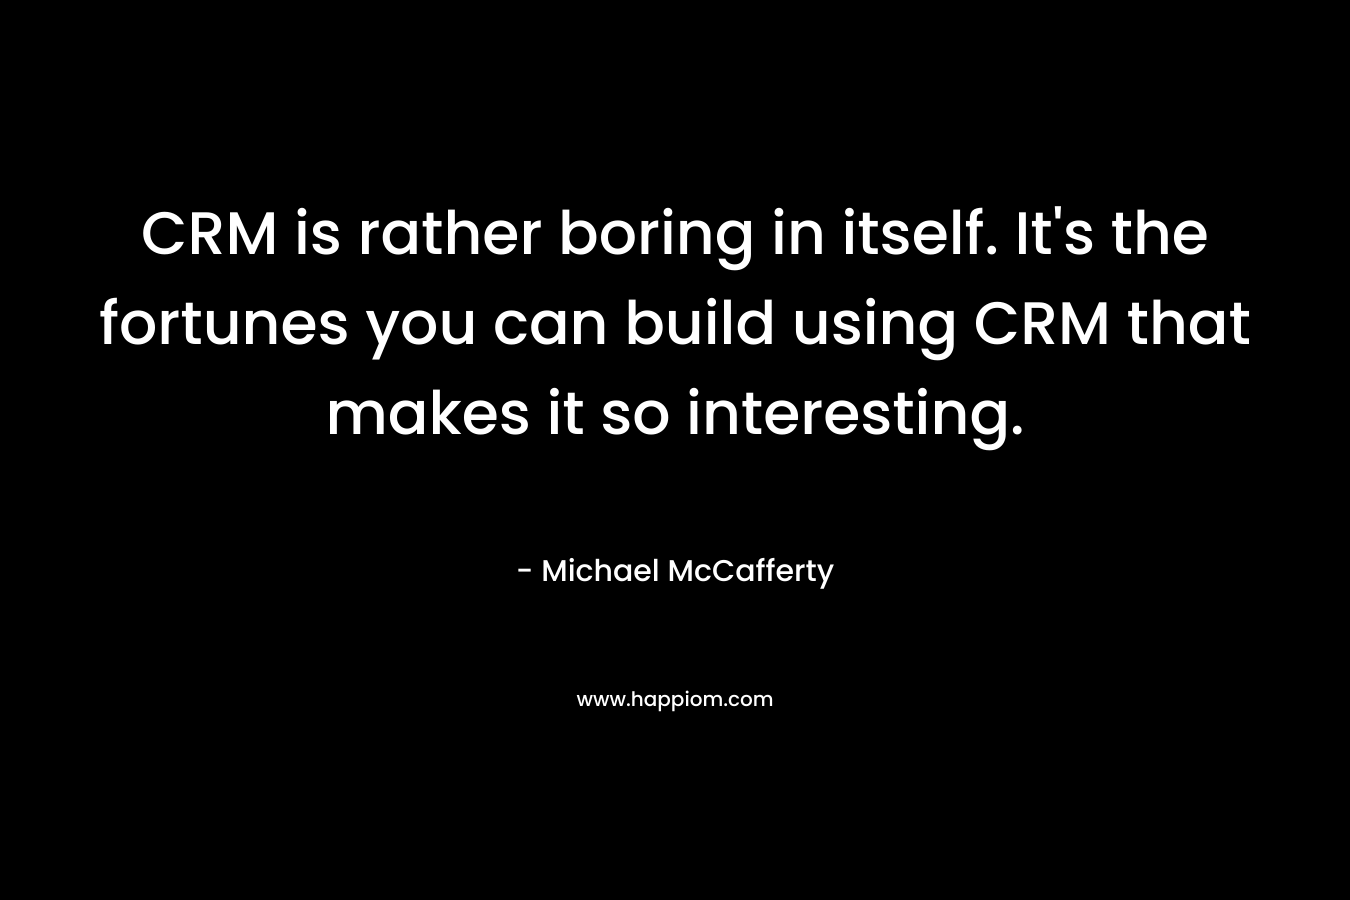 CRM is rather boring in itself. It’s the fortunes you can build using CRM that makes it so interesting. – Michael McCafferty